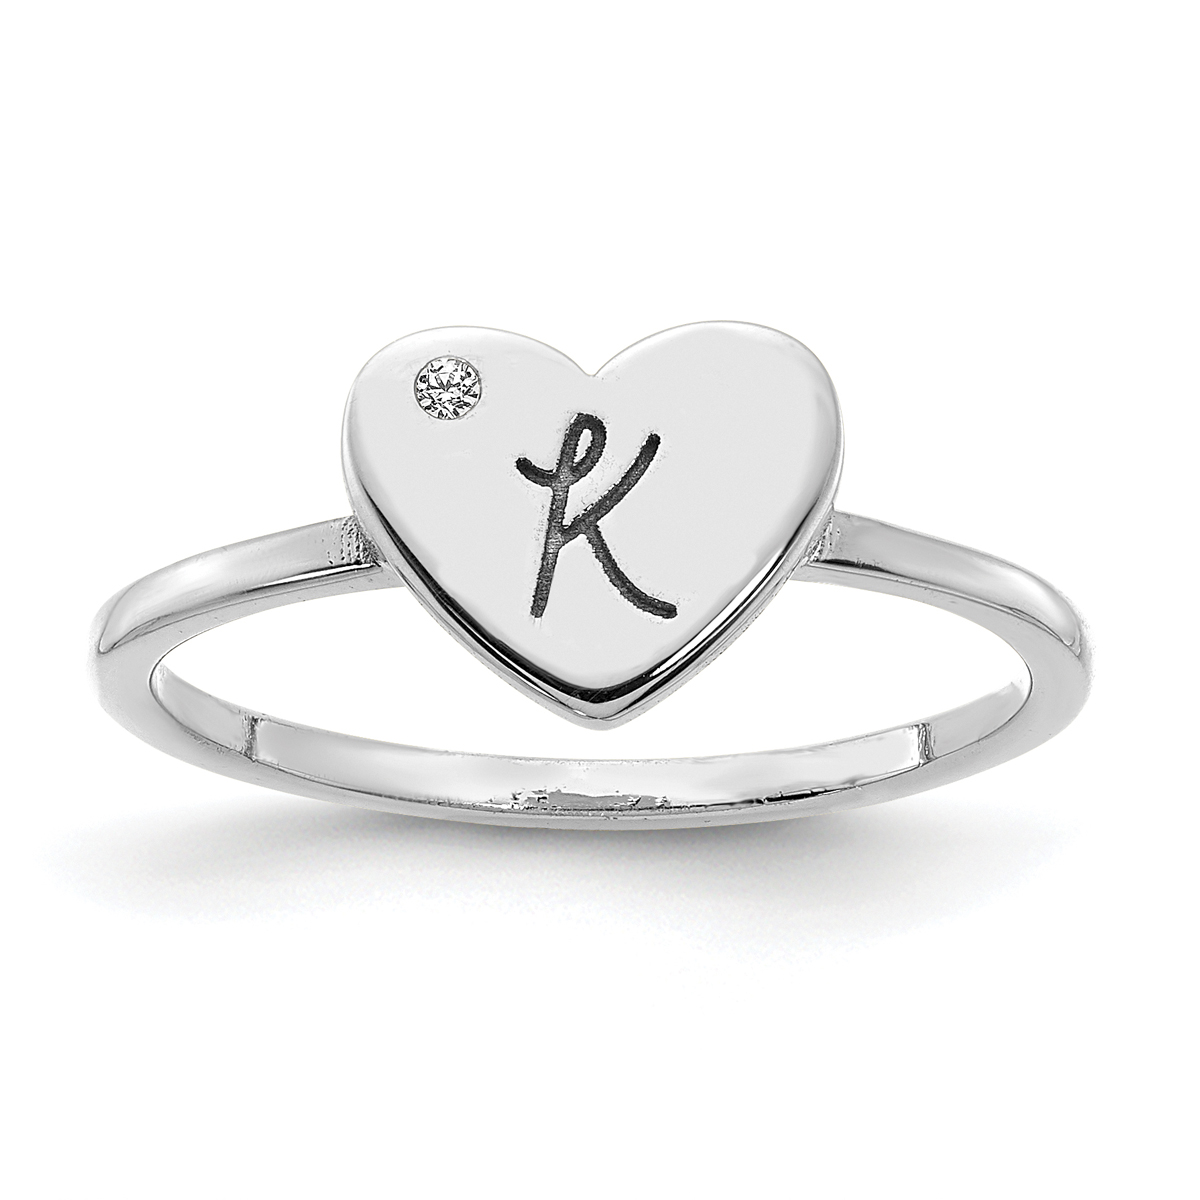 Monogram Heart Signet Ring with Diamond Accent